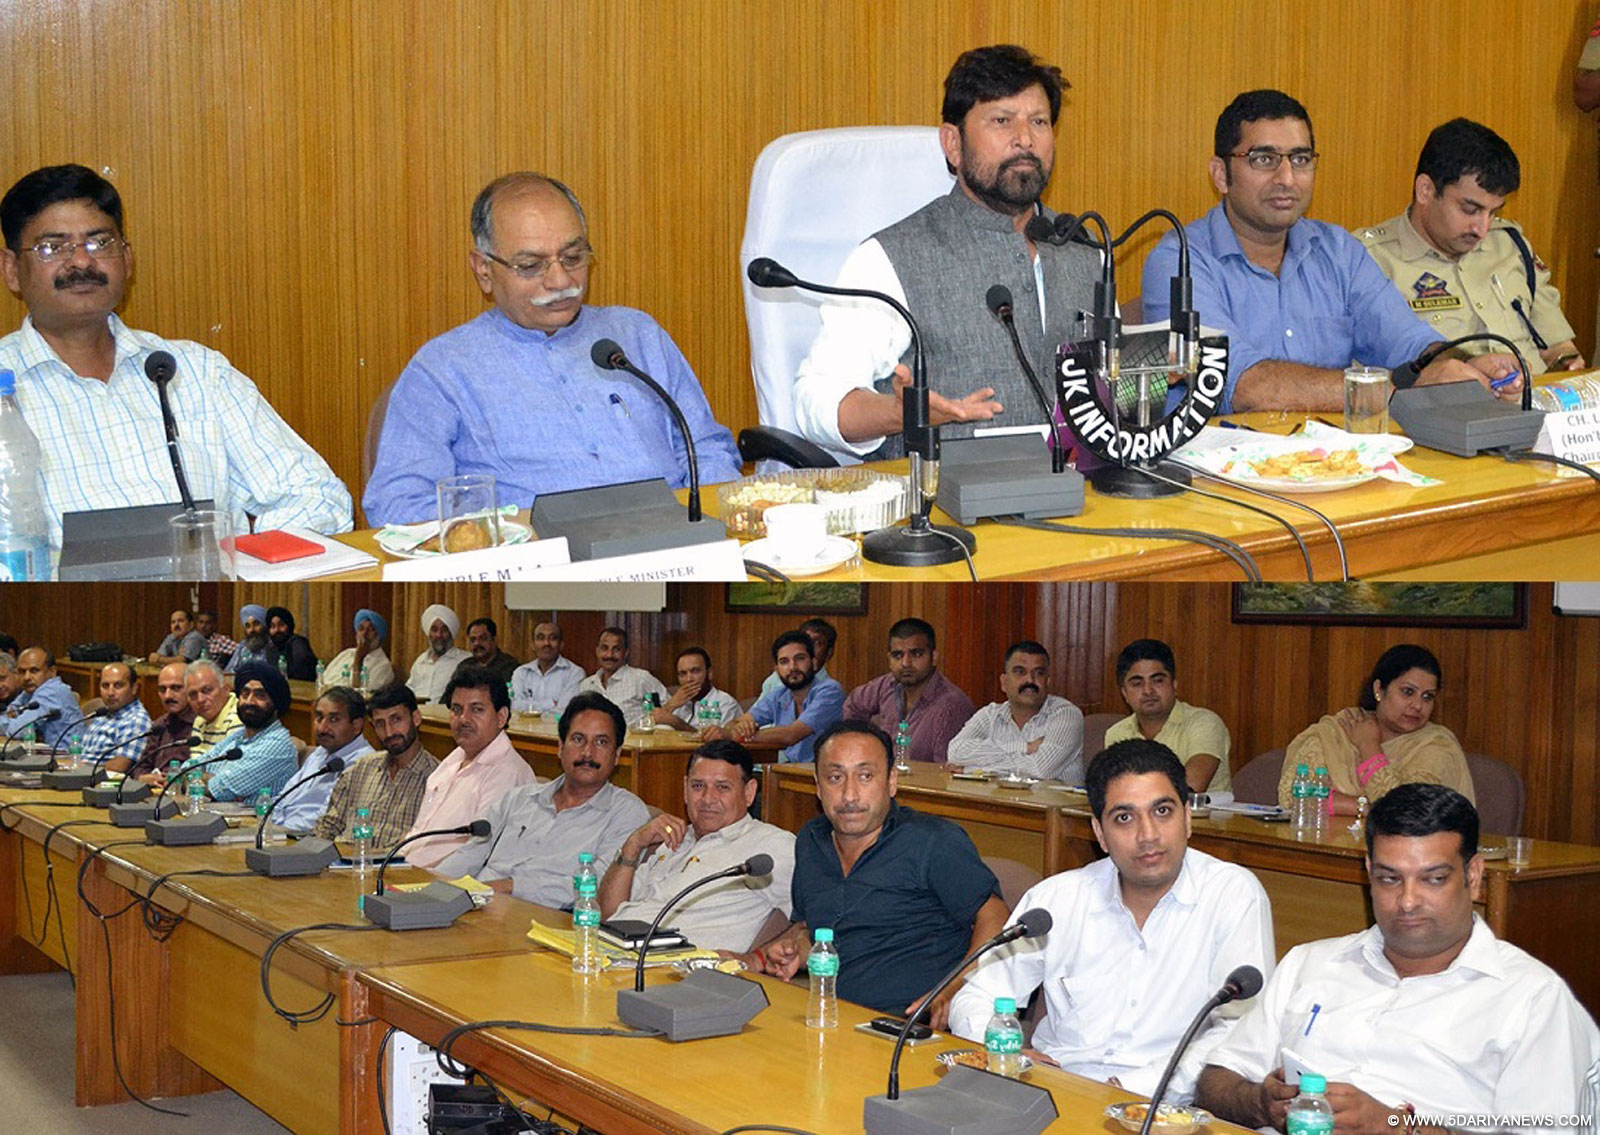 Peace is pre-requisite for growth, development: Choudhary Lal Singh